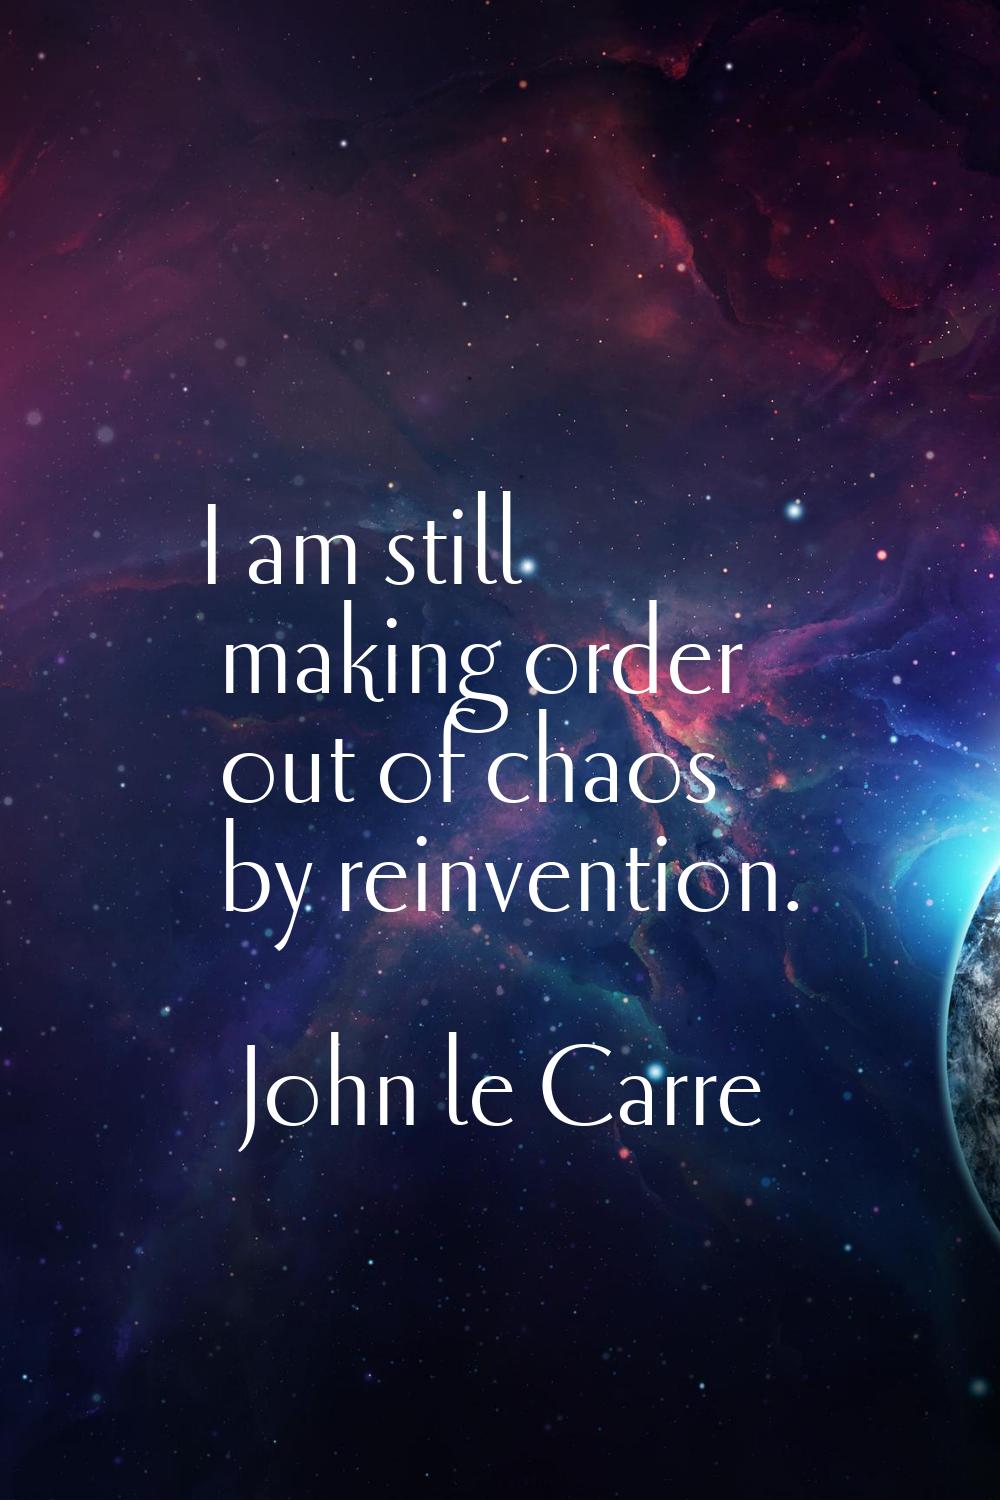 I am still making order out of chaos by reinvention.